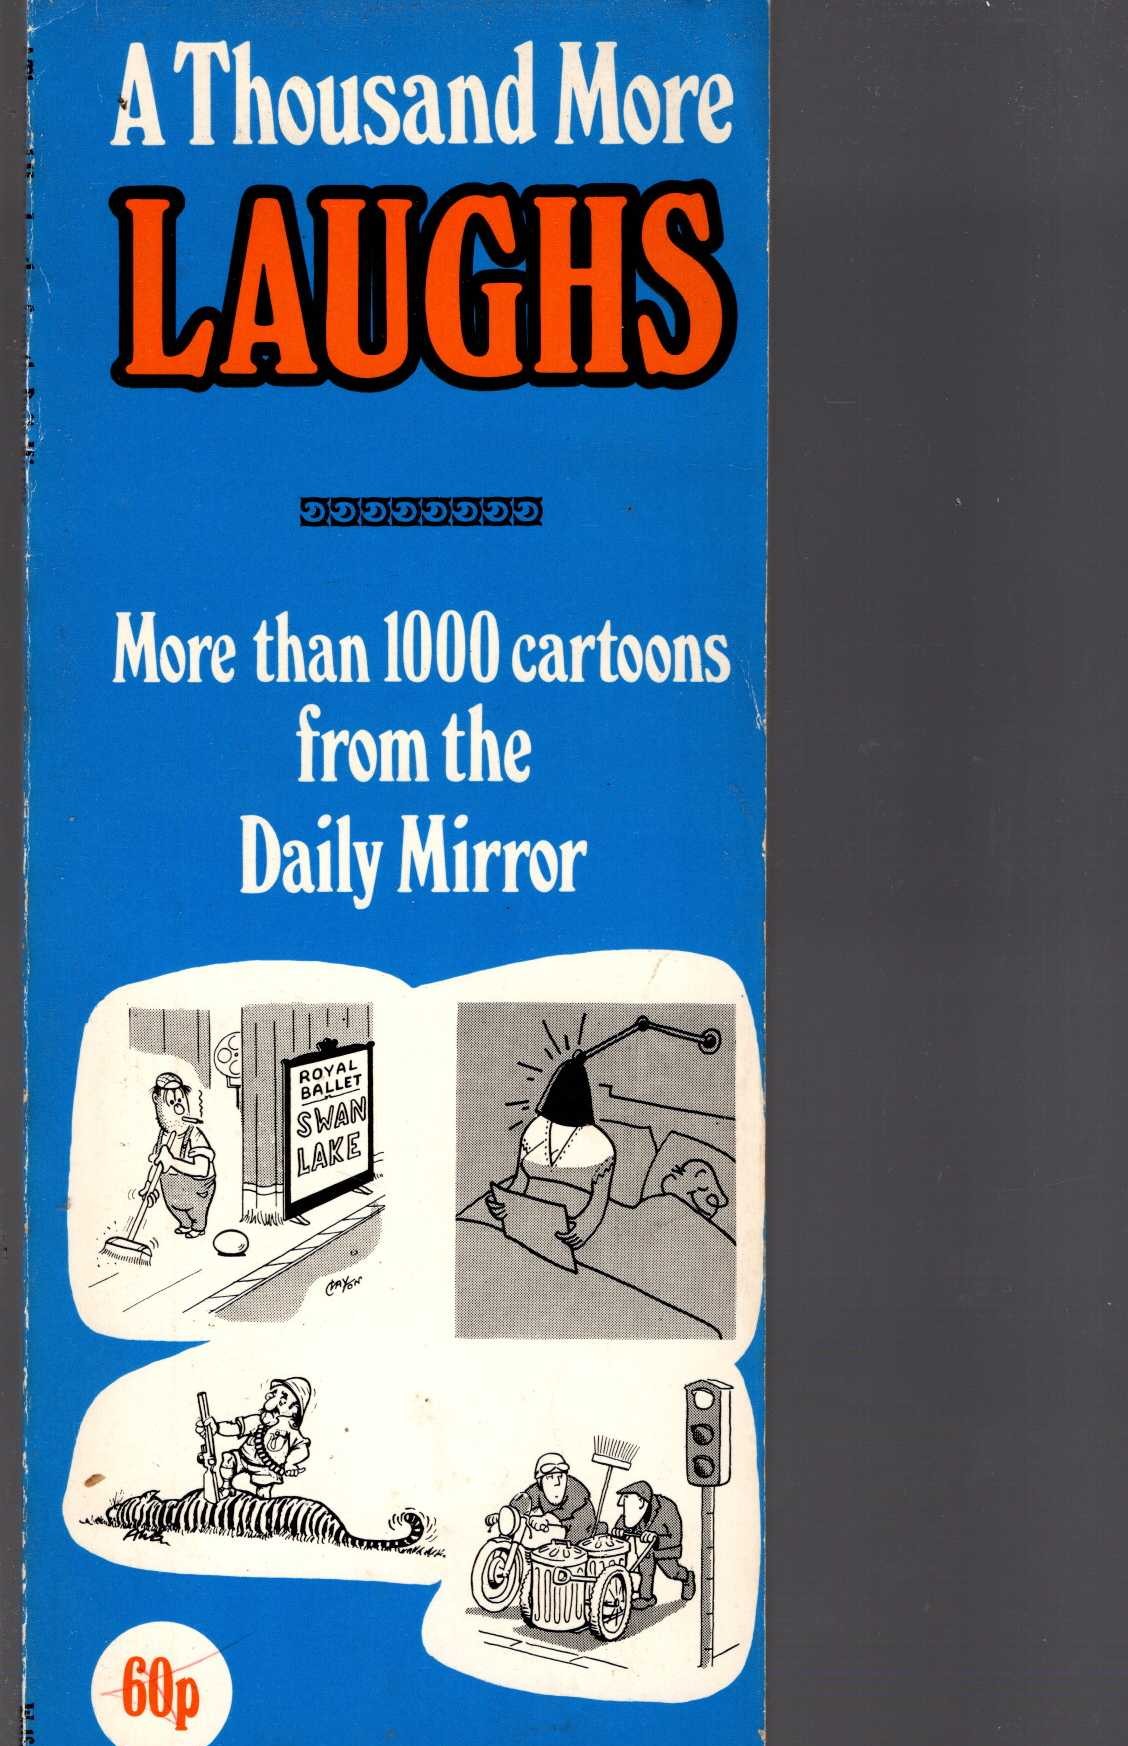 The Daily Mirror  A THOUSAND MORE LAUGHS front book cover image